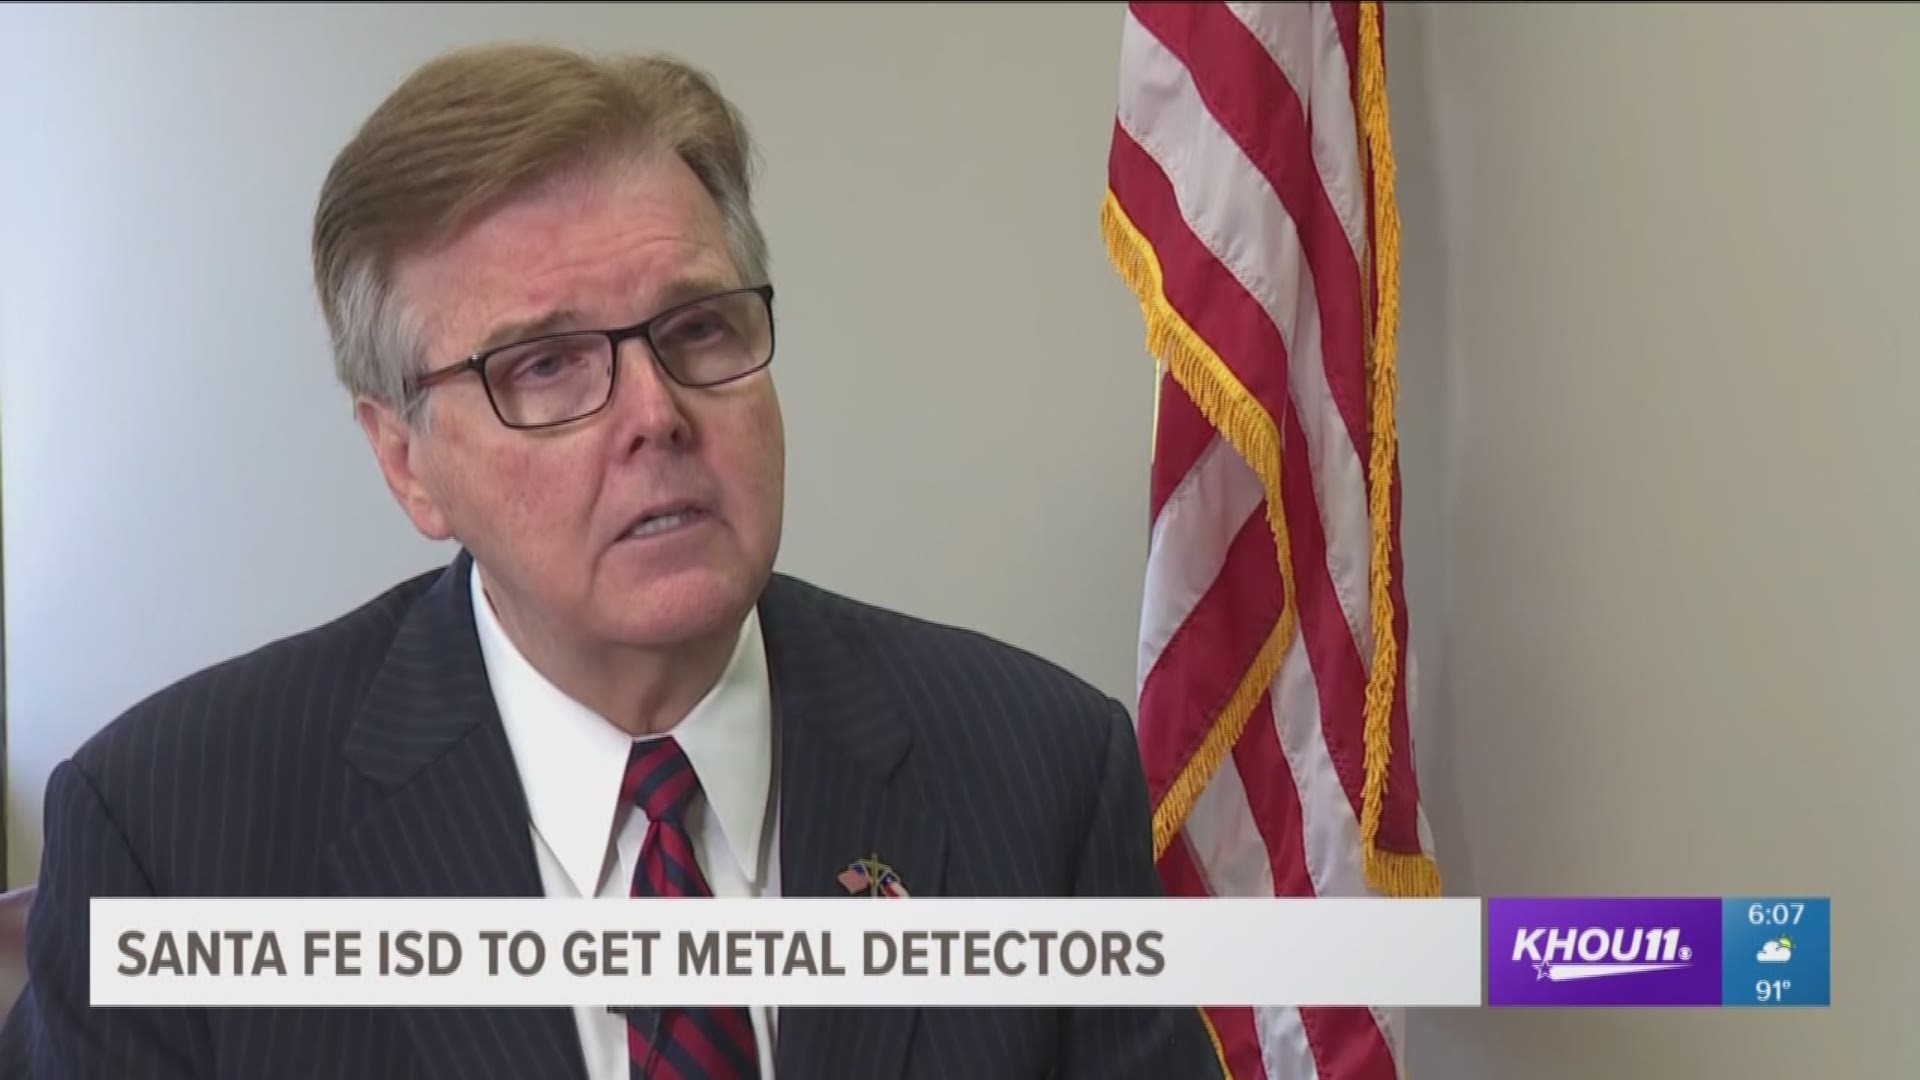 About a month before the new school year begins, Lt. Governor Dan Patrick will donate ten metal detectors to Santa Fe ISD to help beef up security at schools in the district. 